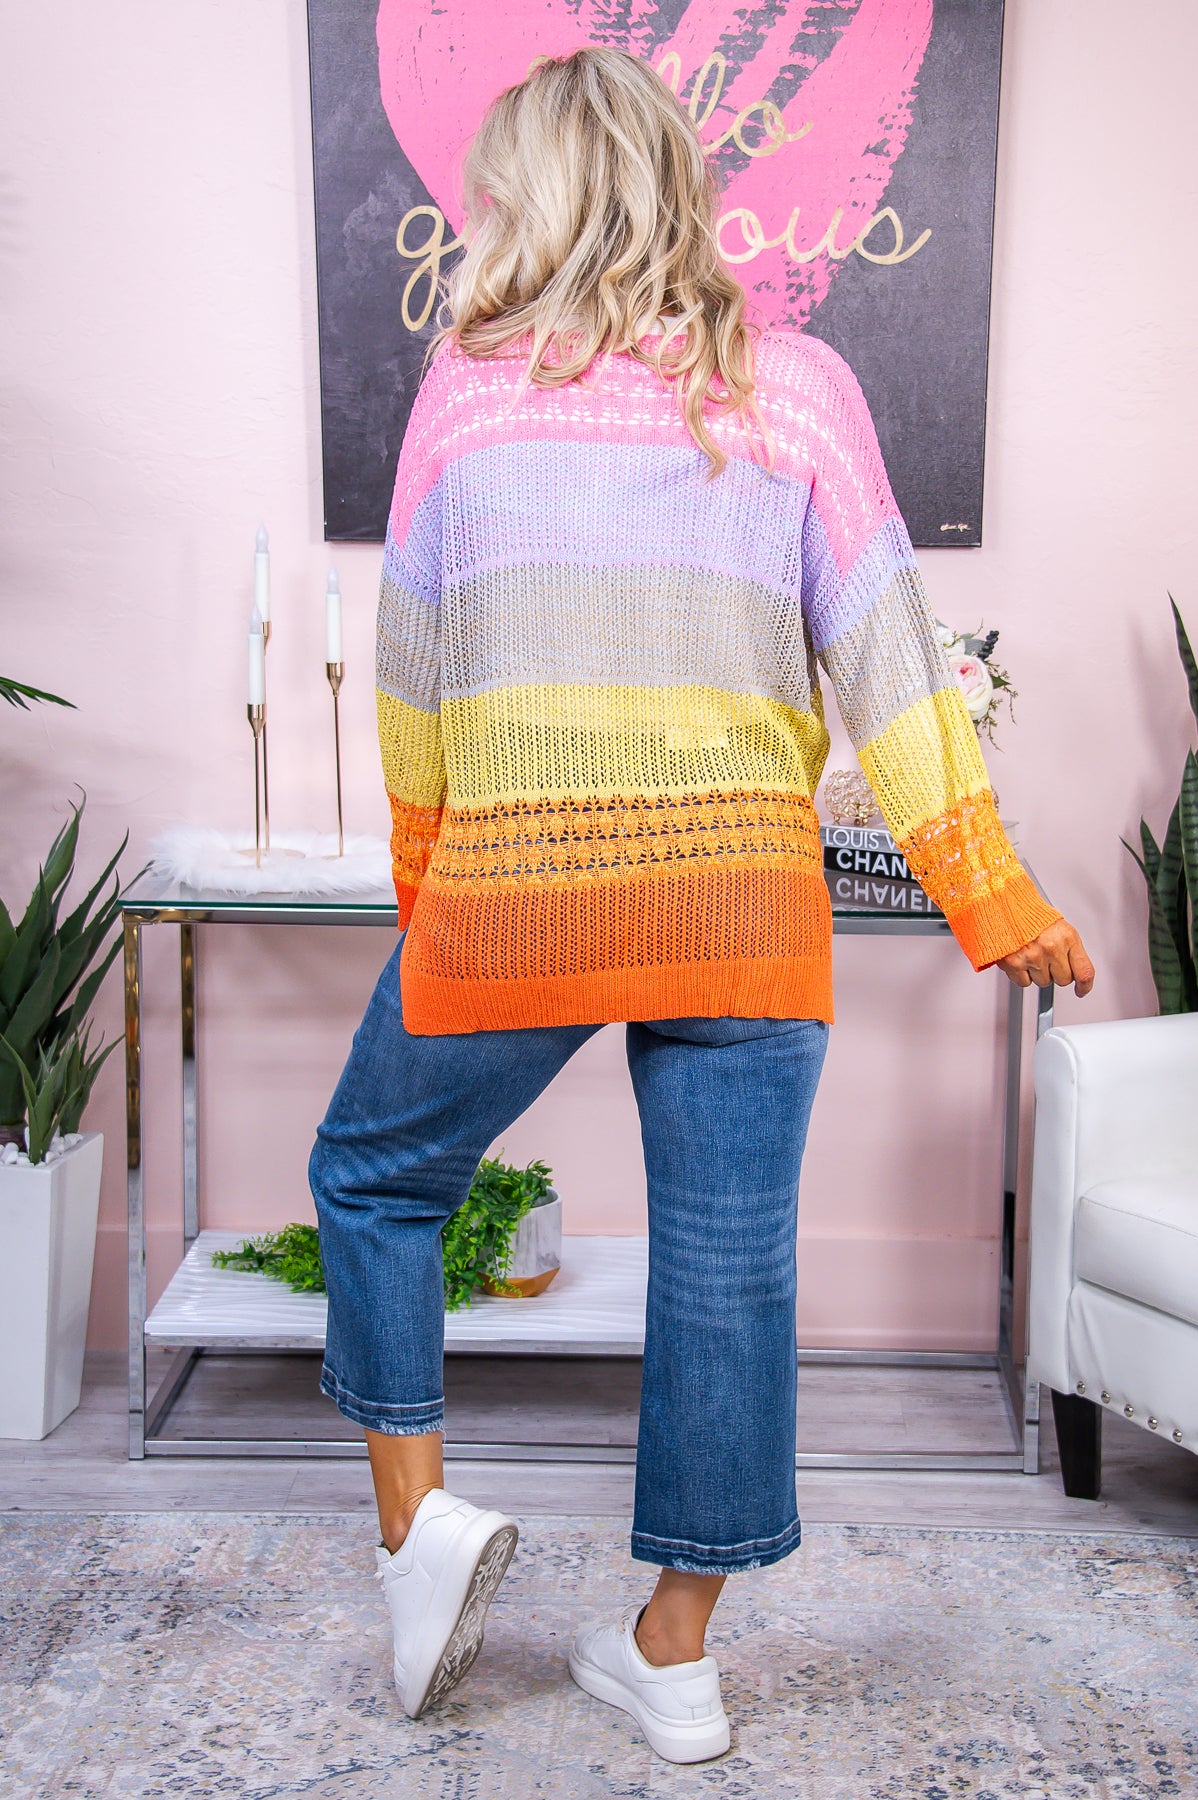 Until Your Mine Orange/Multi Color Striped Knitted Mesh Top - T7840OR